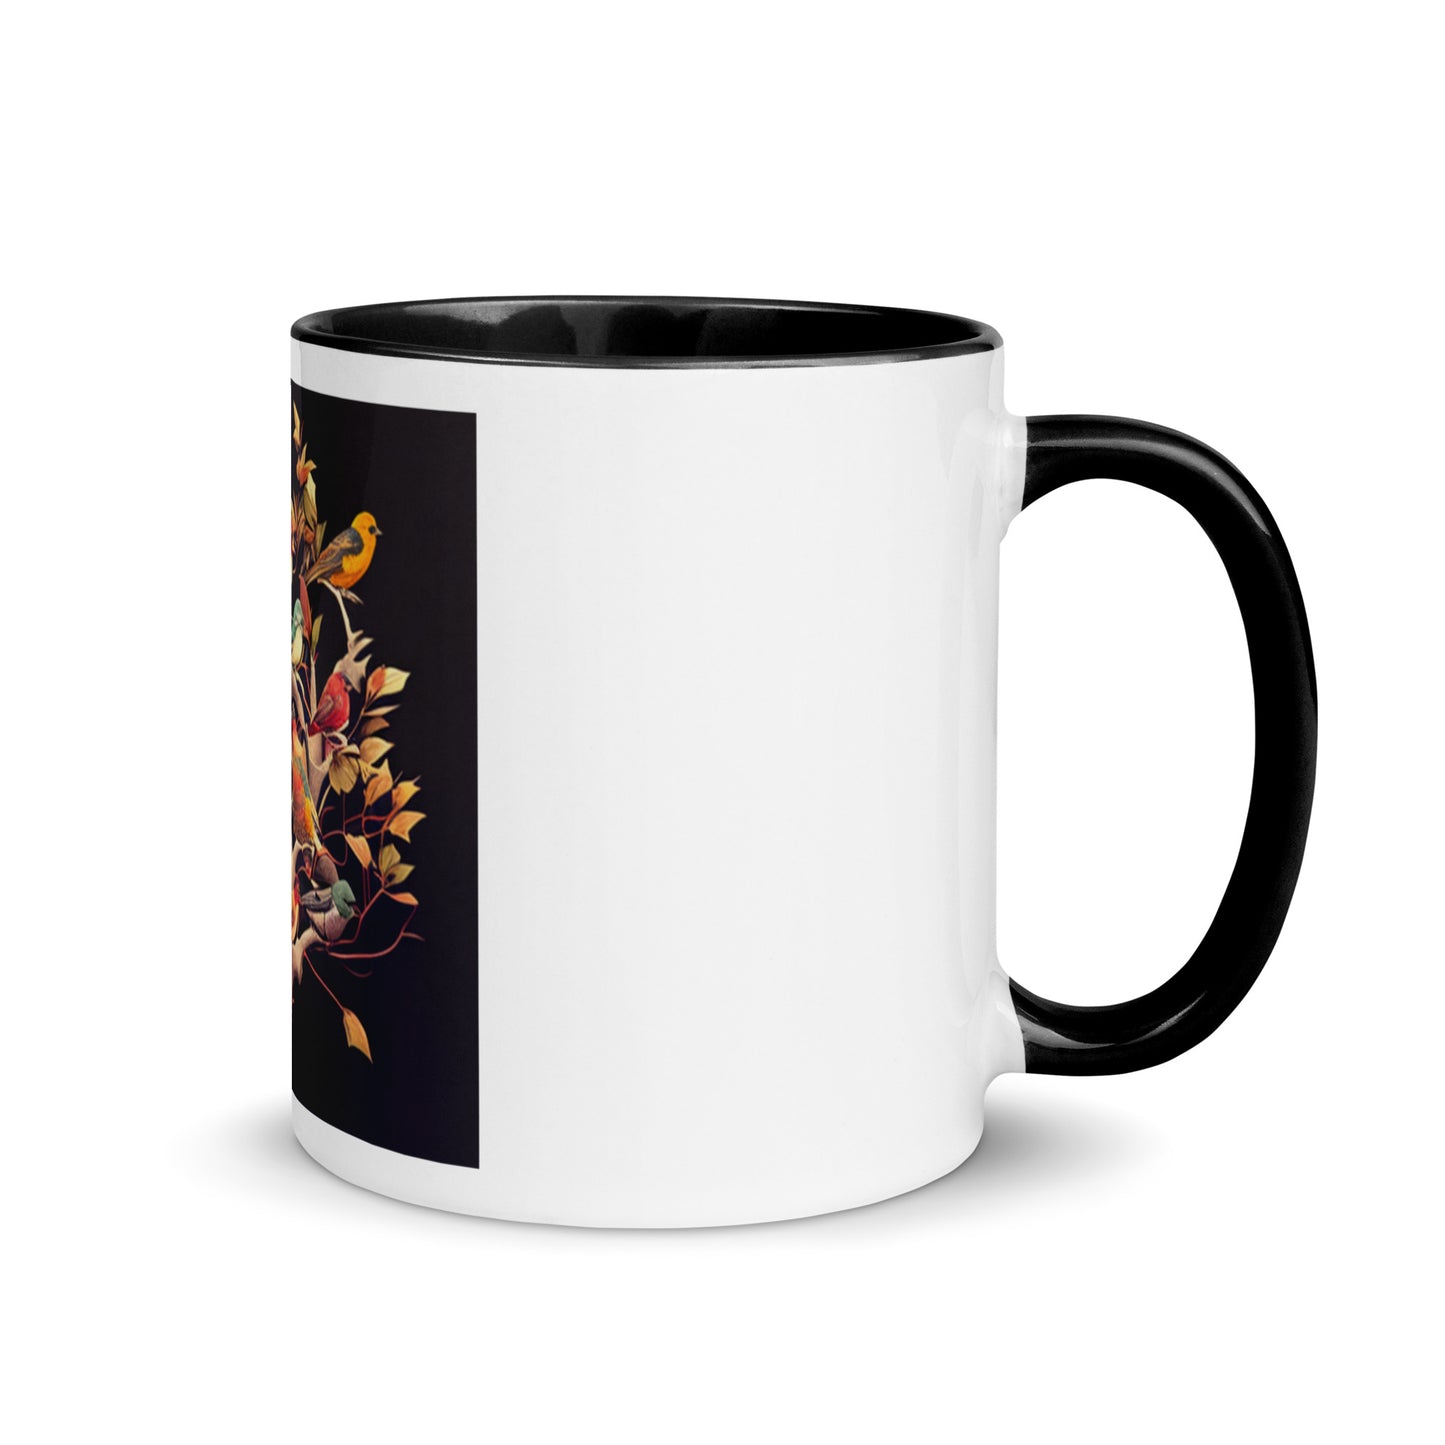 "Birds On A Tree" Coffee Cup - Weave Got Gifts - Unique Gifts You Won’t Find Anywhere Else!